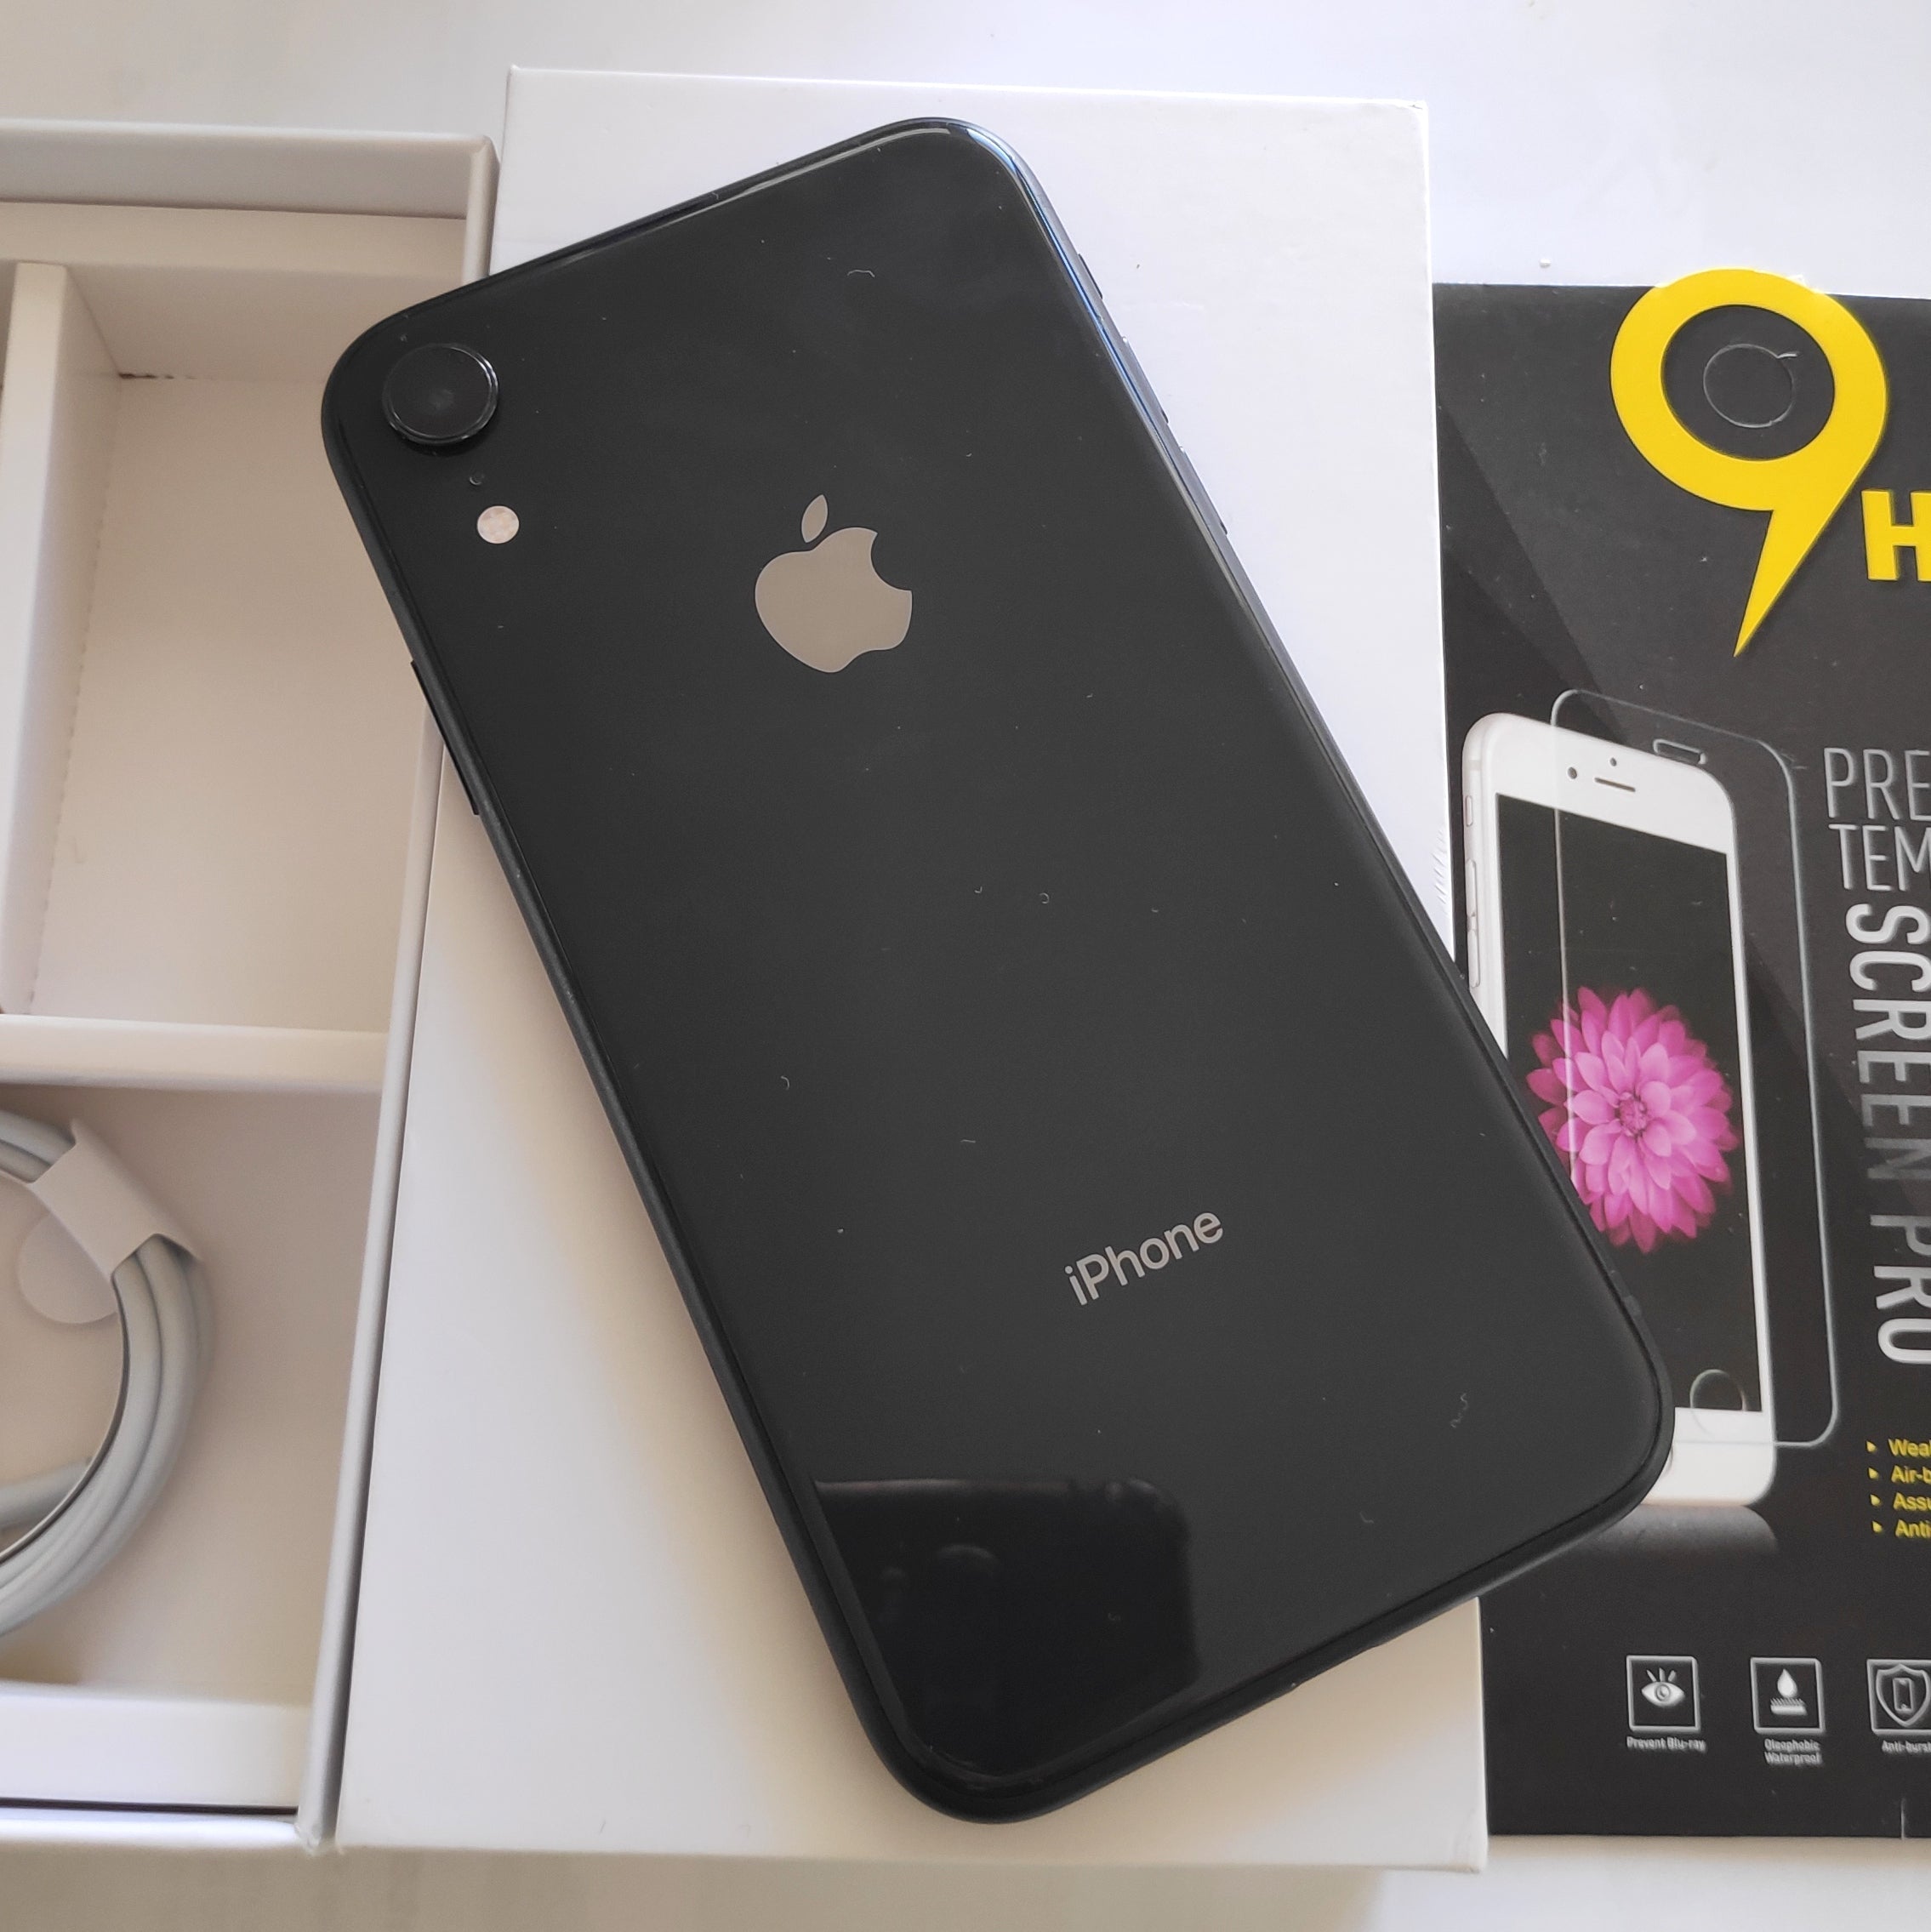 Apple iPhone XR 256GB Black - New Case, Glass Screen Protector & Shipping (Exc)